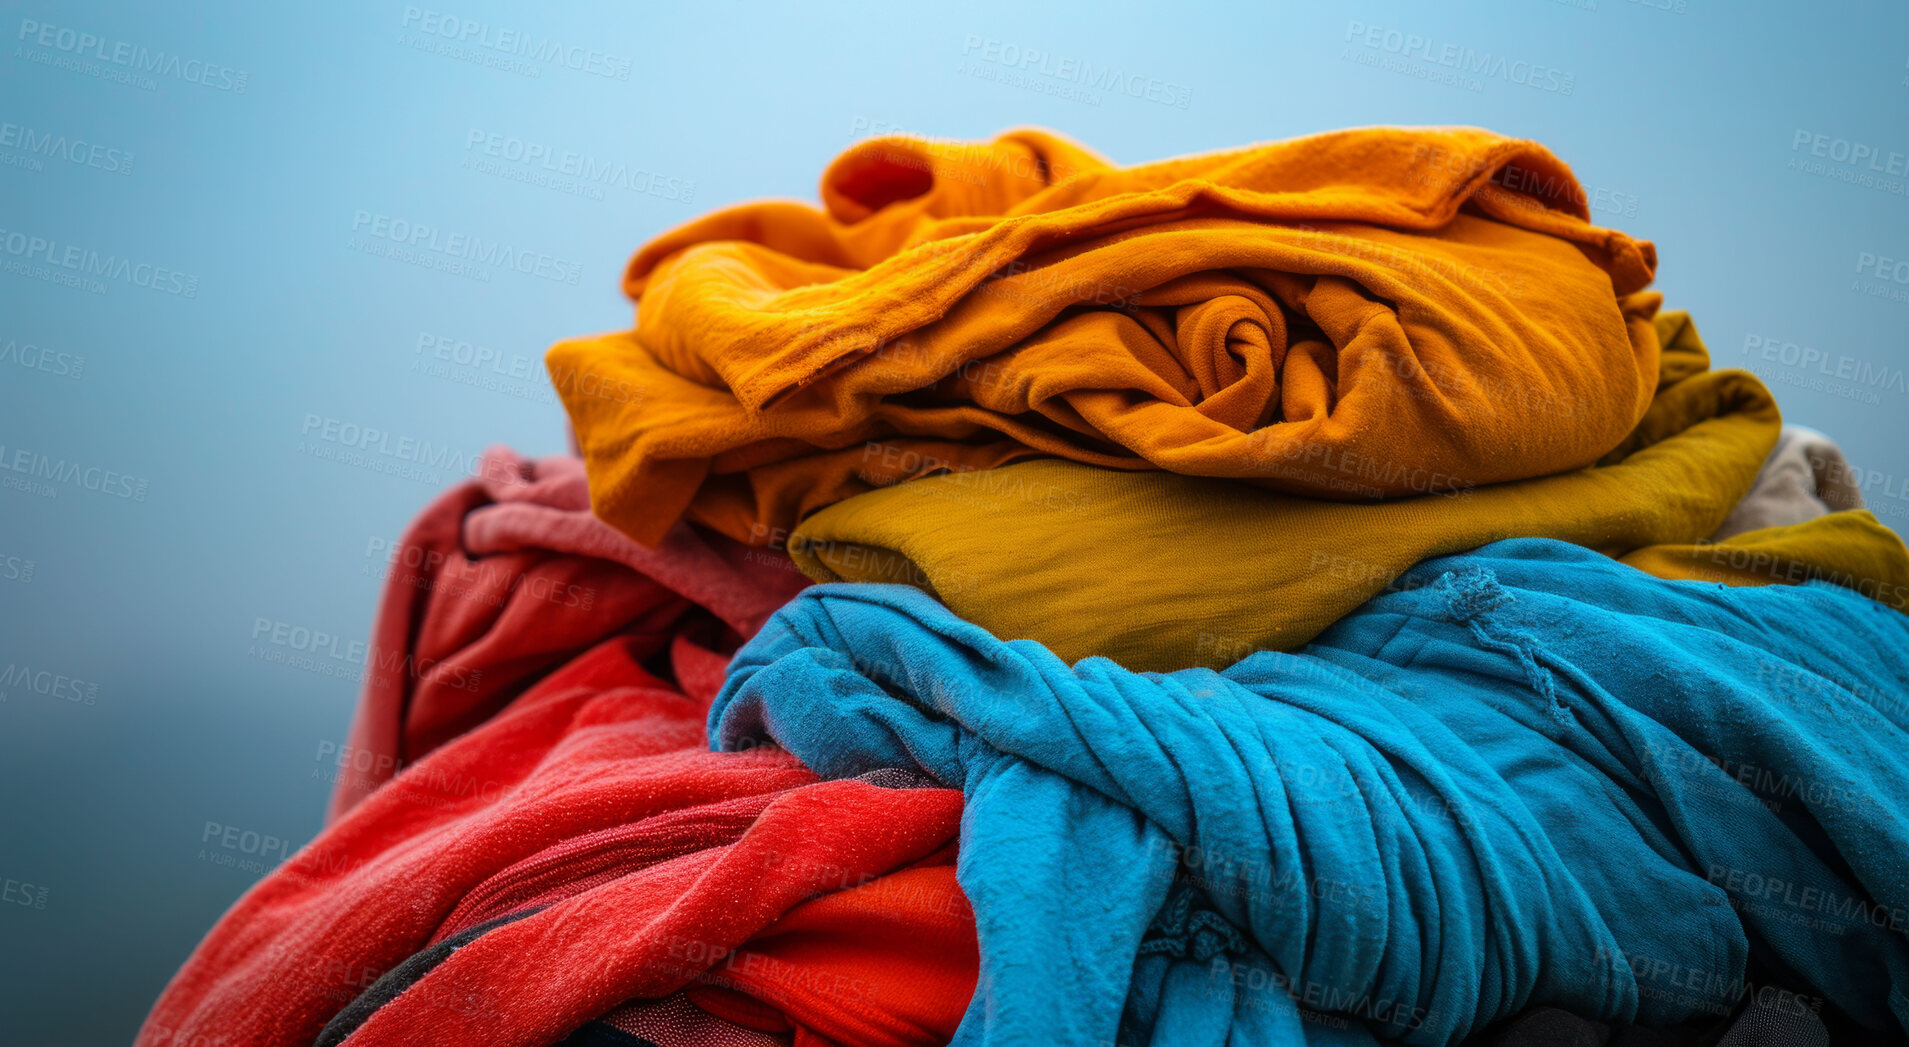 Buy stock photo Clothes, fabric and clean laundry background for laundromat business, service or fabric softener. Colourful, pile or dirty clothing backdrop for mockup, product design or eco friendly cleaning